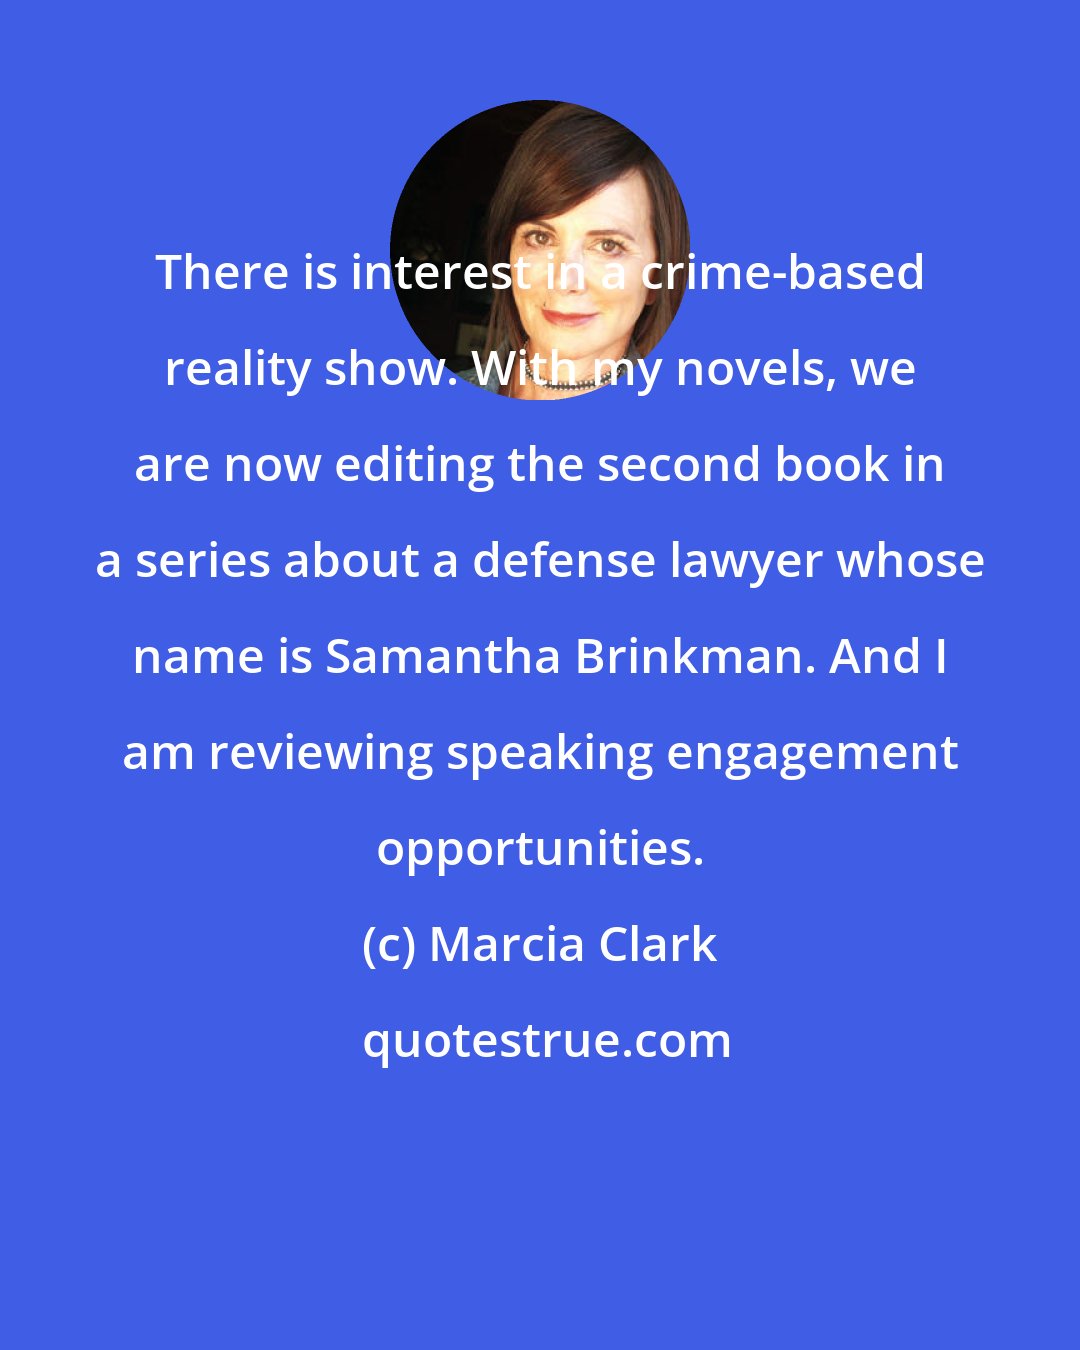 Marcia Clark: There is interest in a crime-based reality show. With my novels, we are now editing the second book in a series about a defense lawyer whose name is Samantha Brinkman. And I am reviewing speaking engagement opportunities.